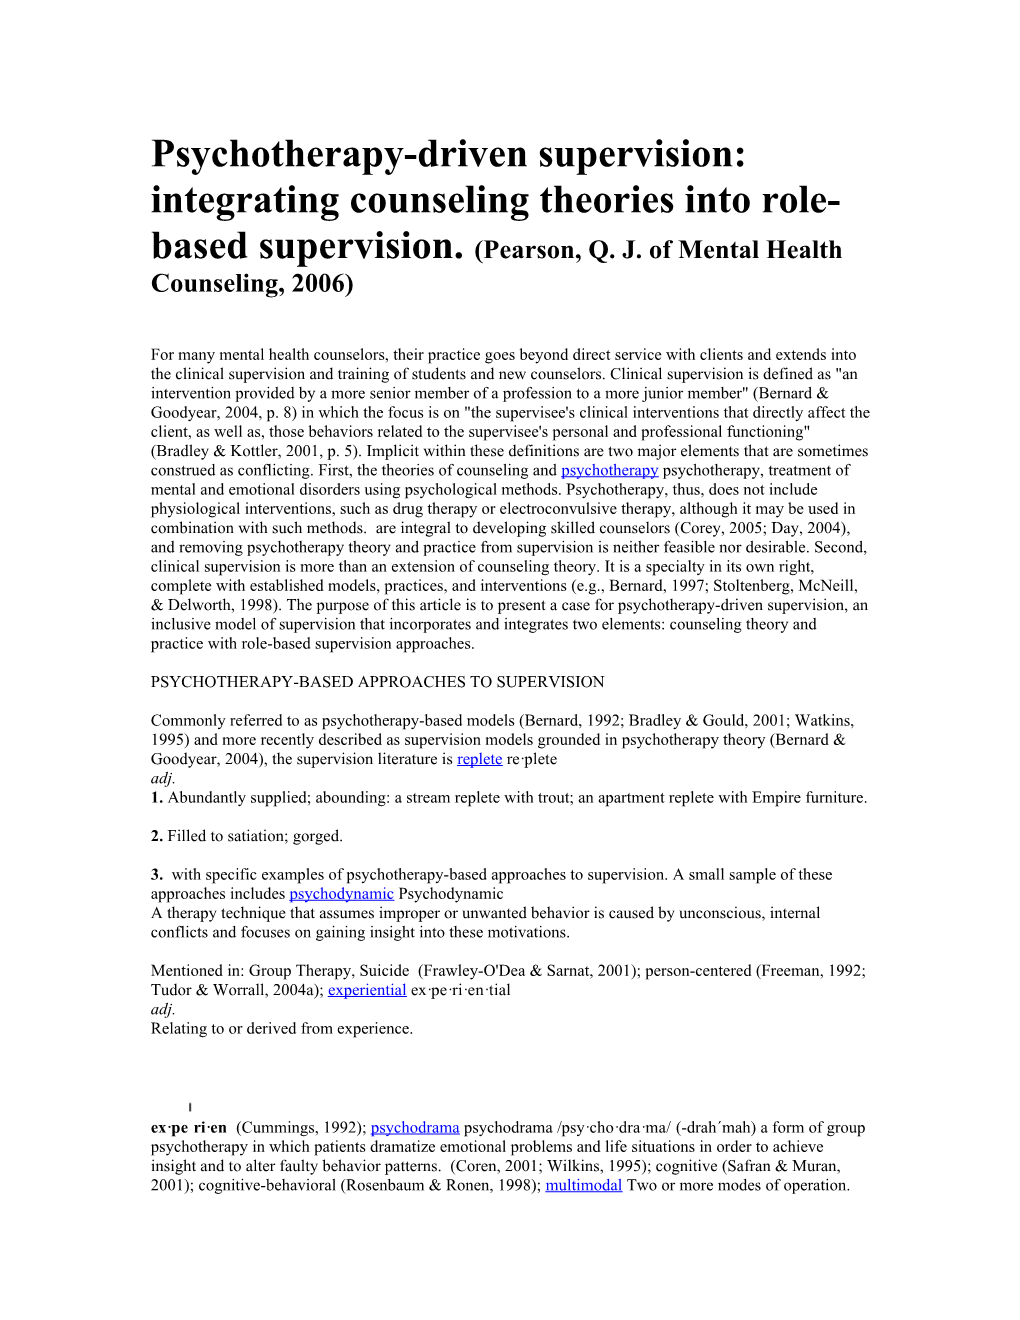 Psychotherapy-Driven Supervision: Integrating Counseling Theories Into Role-Based